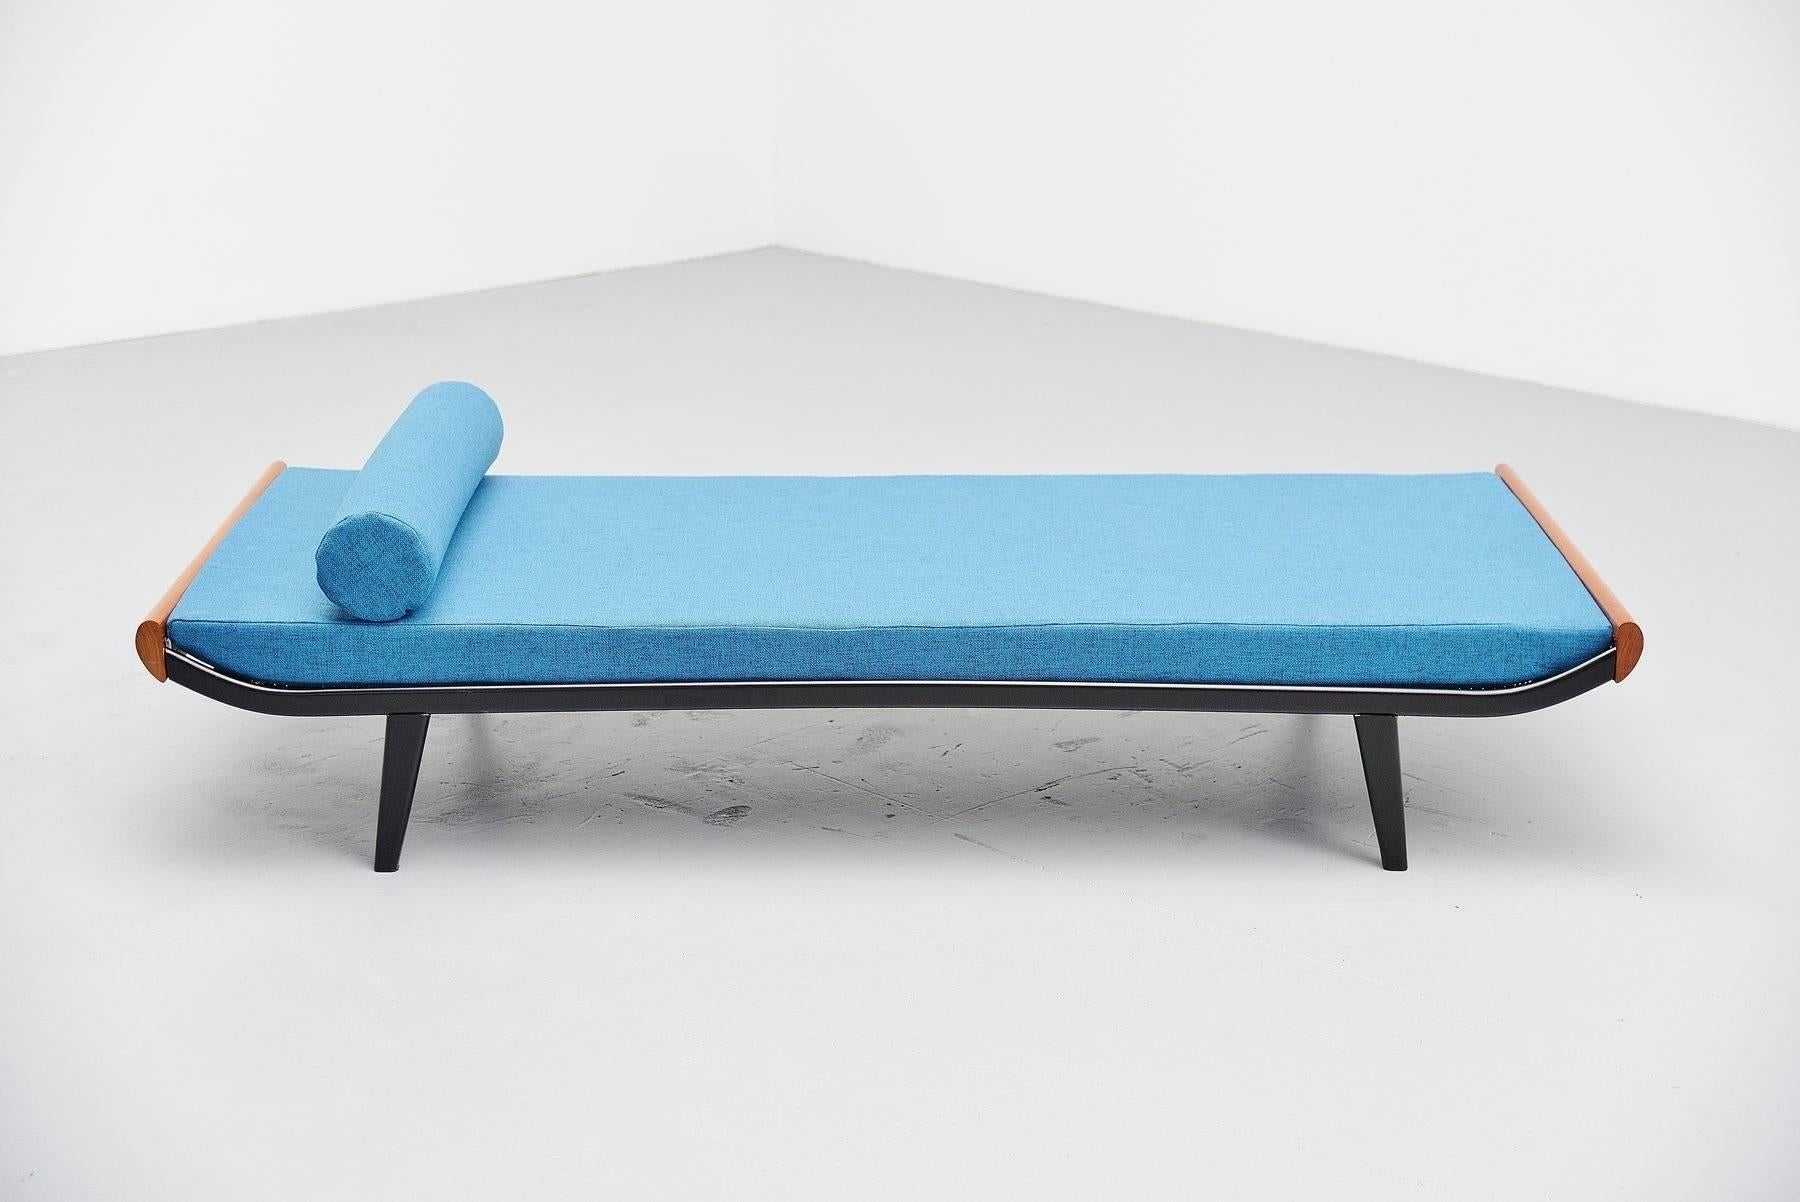 Dick Cordemeijer Cleopatra Daybed with Mattress for Auping, 1954 (Mitte des 20. Jahrhunderts)